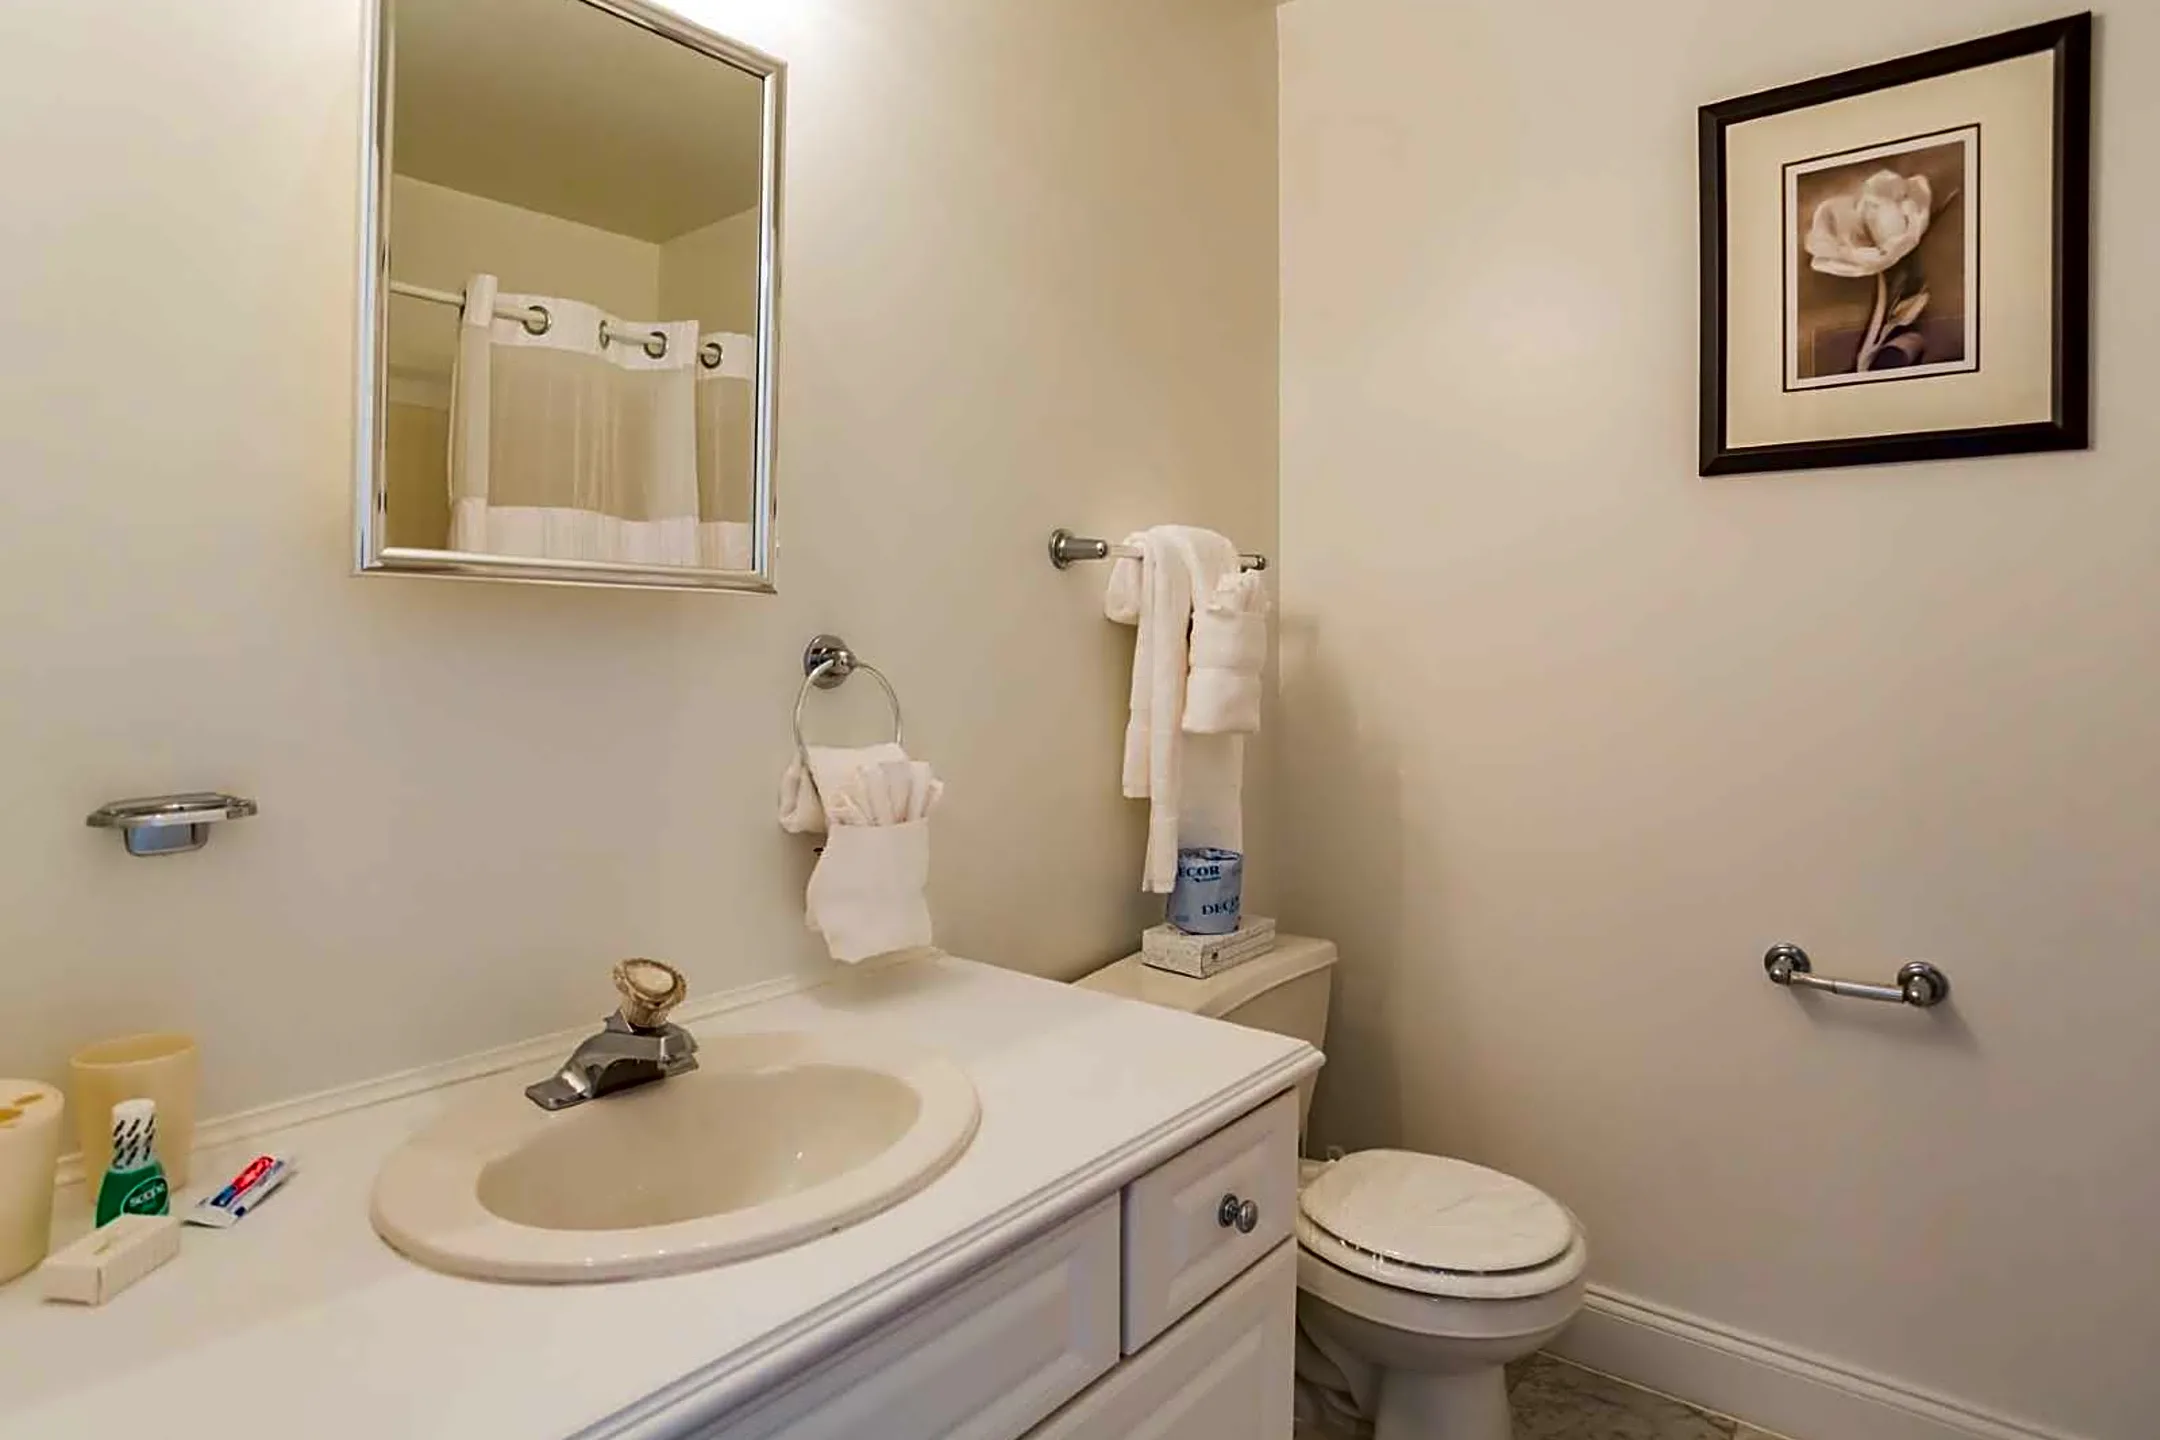 Bathroom - The Fairways Apartments & Townhomes - Thorndale, PA